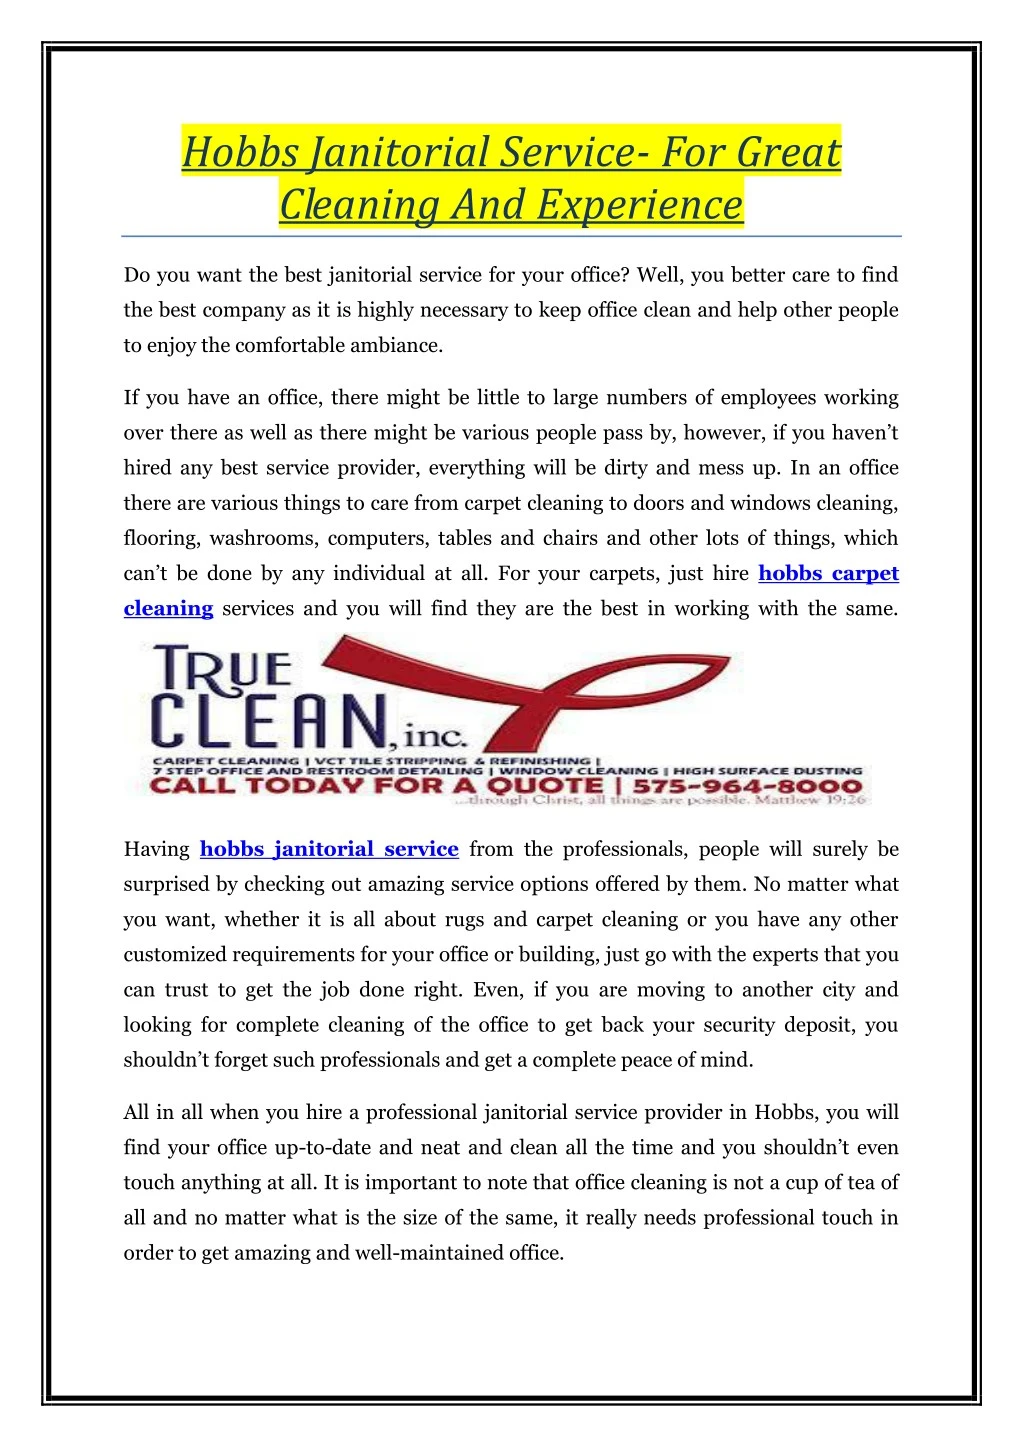 hobbs janitorial service for great cleaning